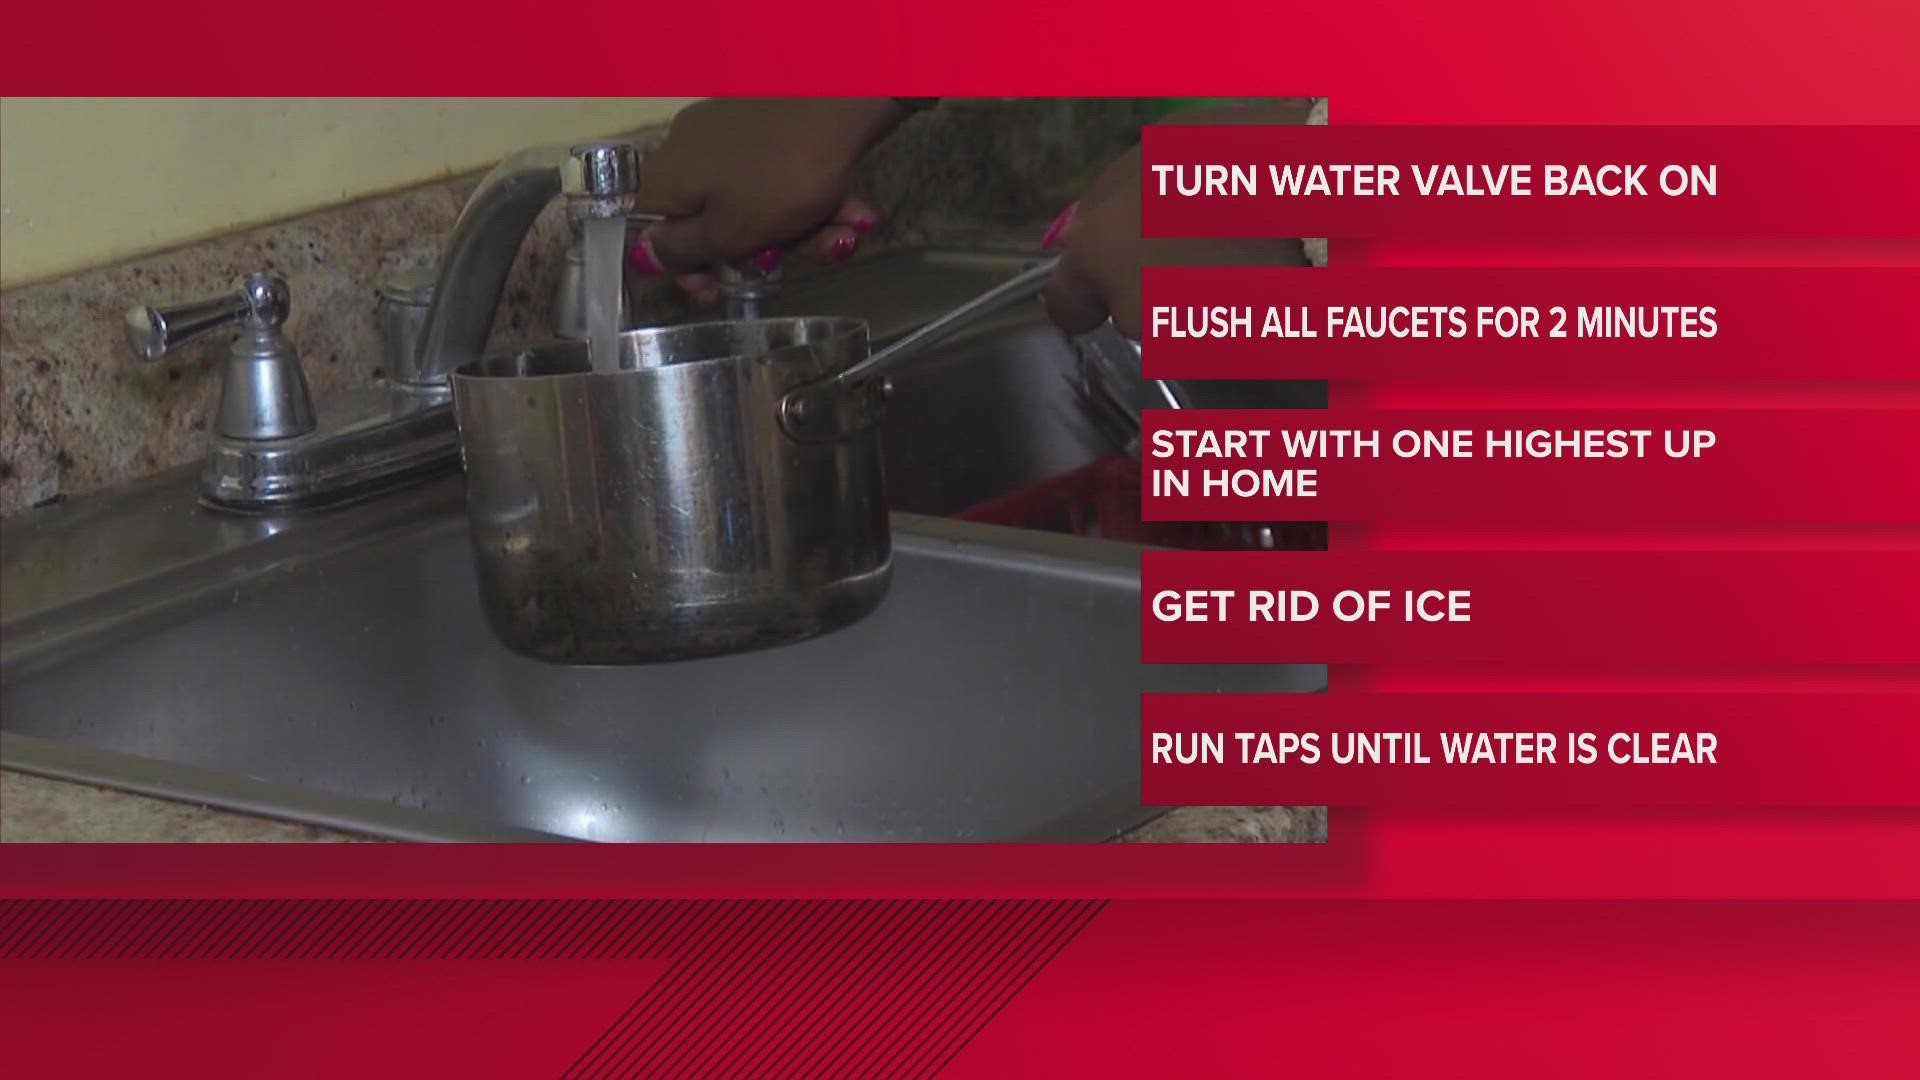 MLGW tells customers to run faucets for at least two minutes.